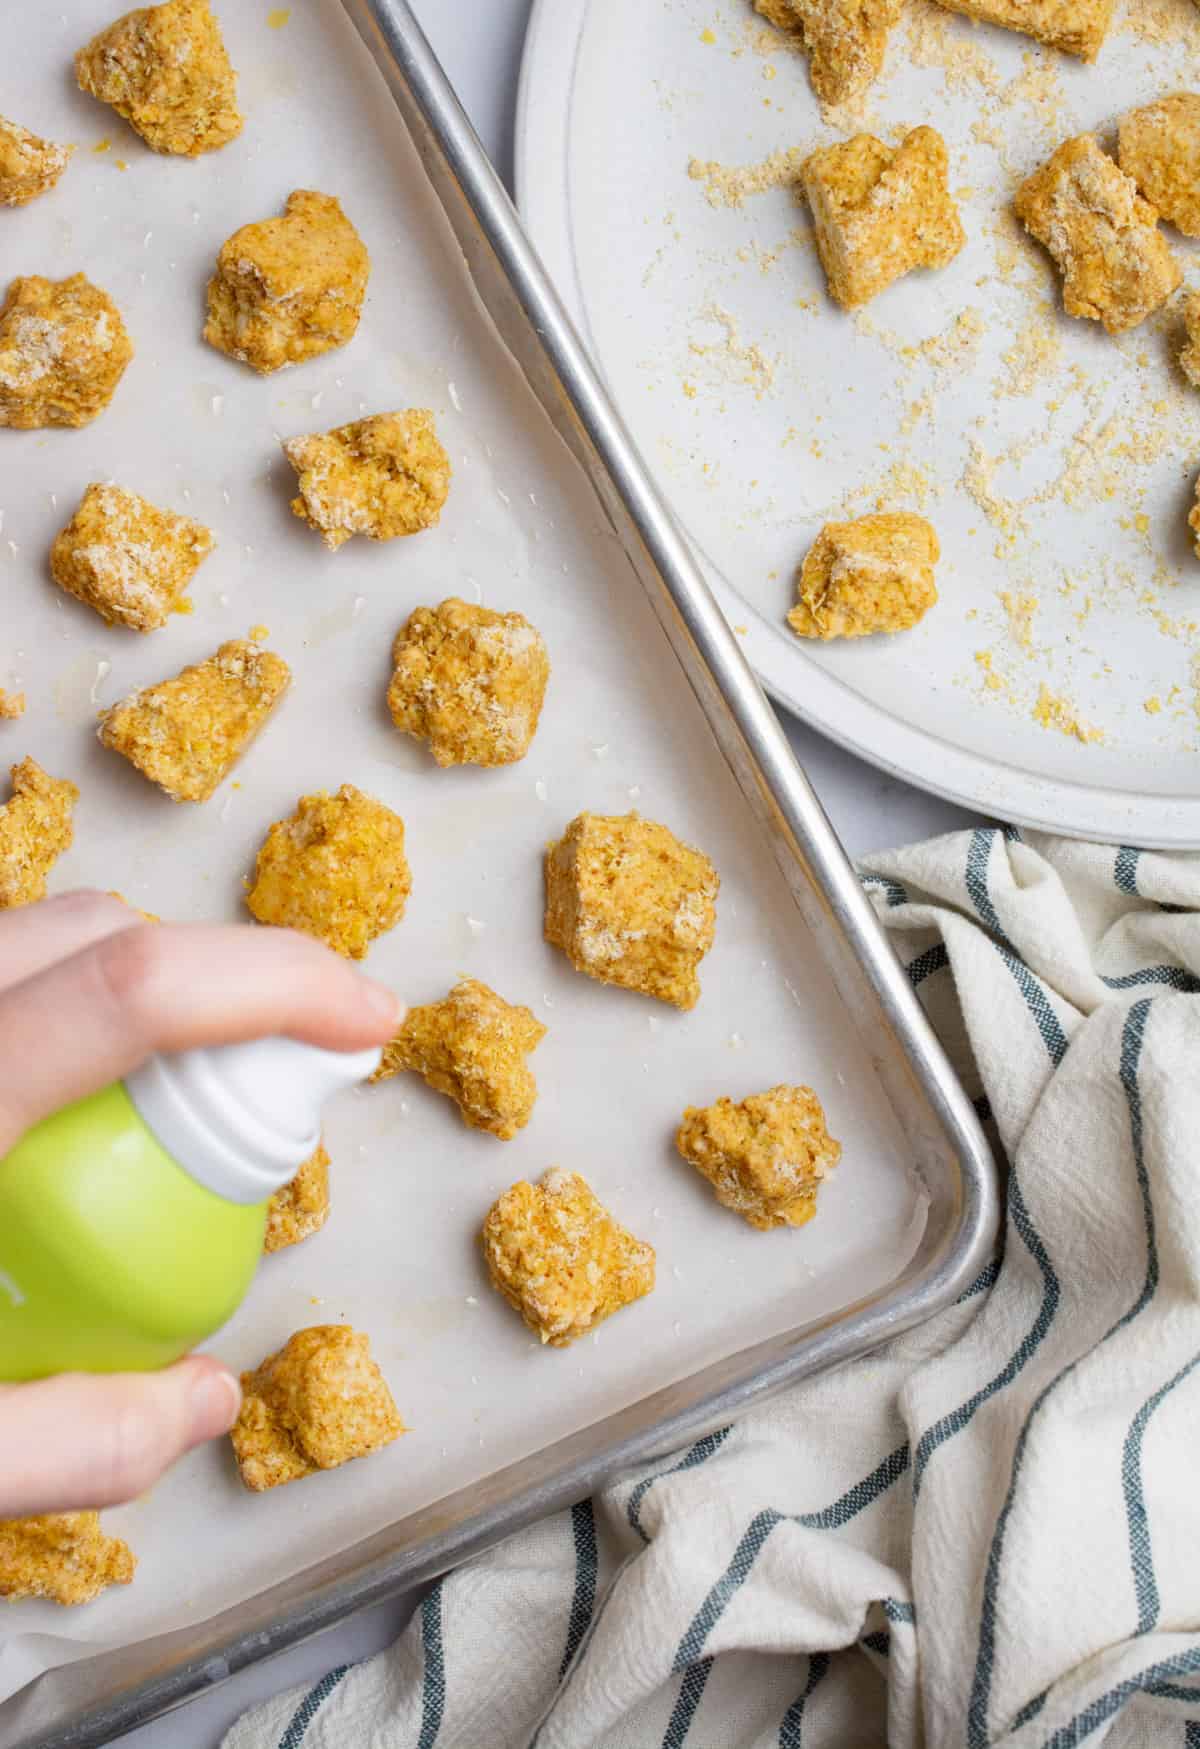 Breaded tofu nuggets on a baking sheet being sprayed with cooking oil.